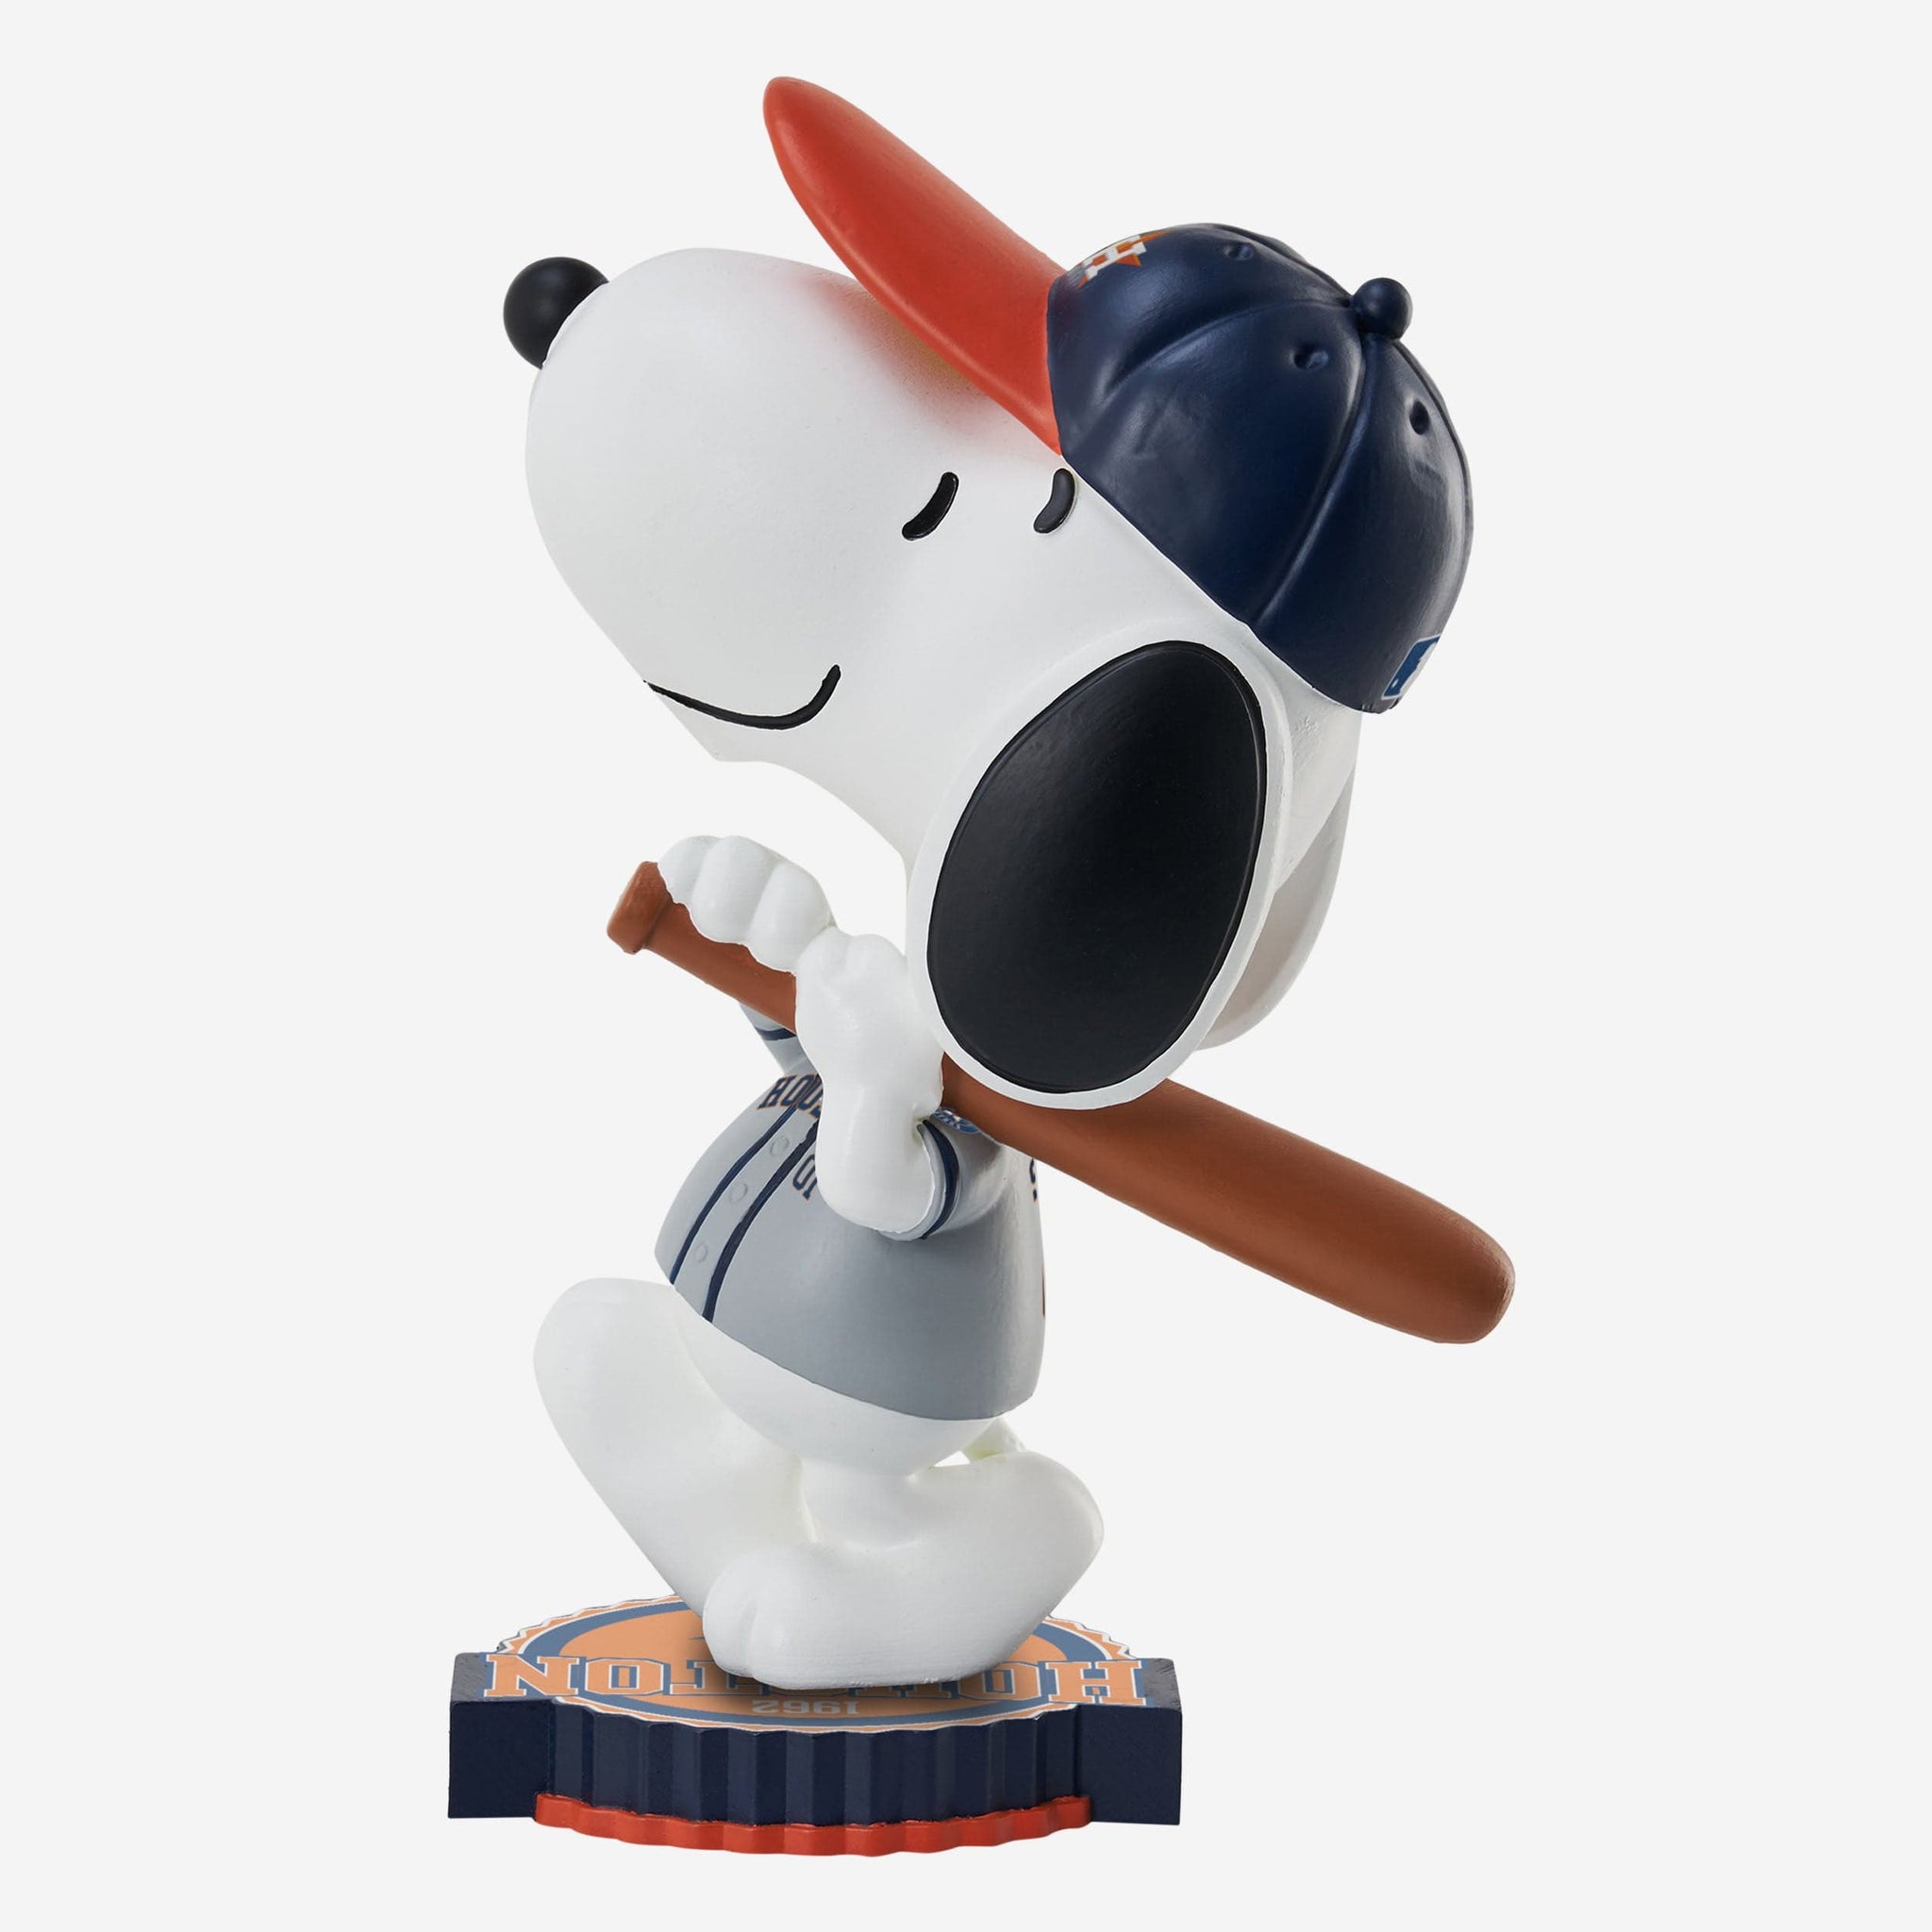 Houston Astros Peanuts Night Artemis Snoopy bobblehead signed by